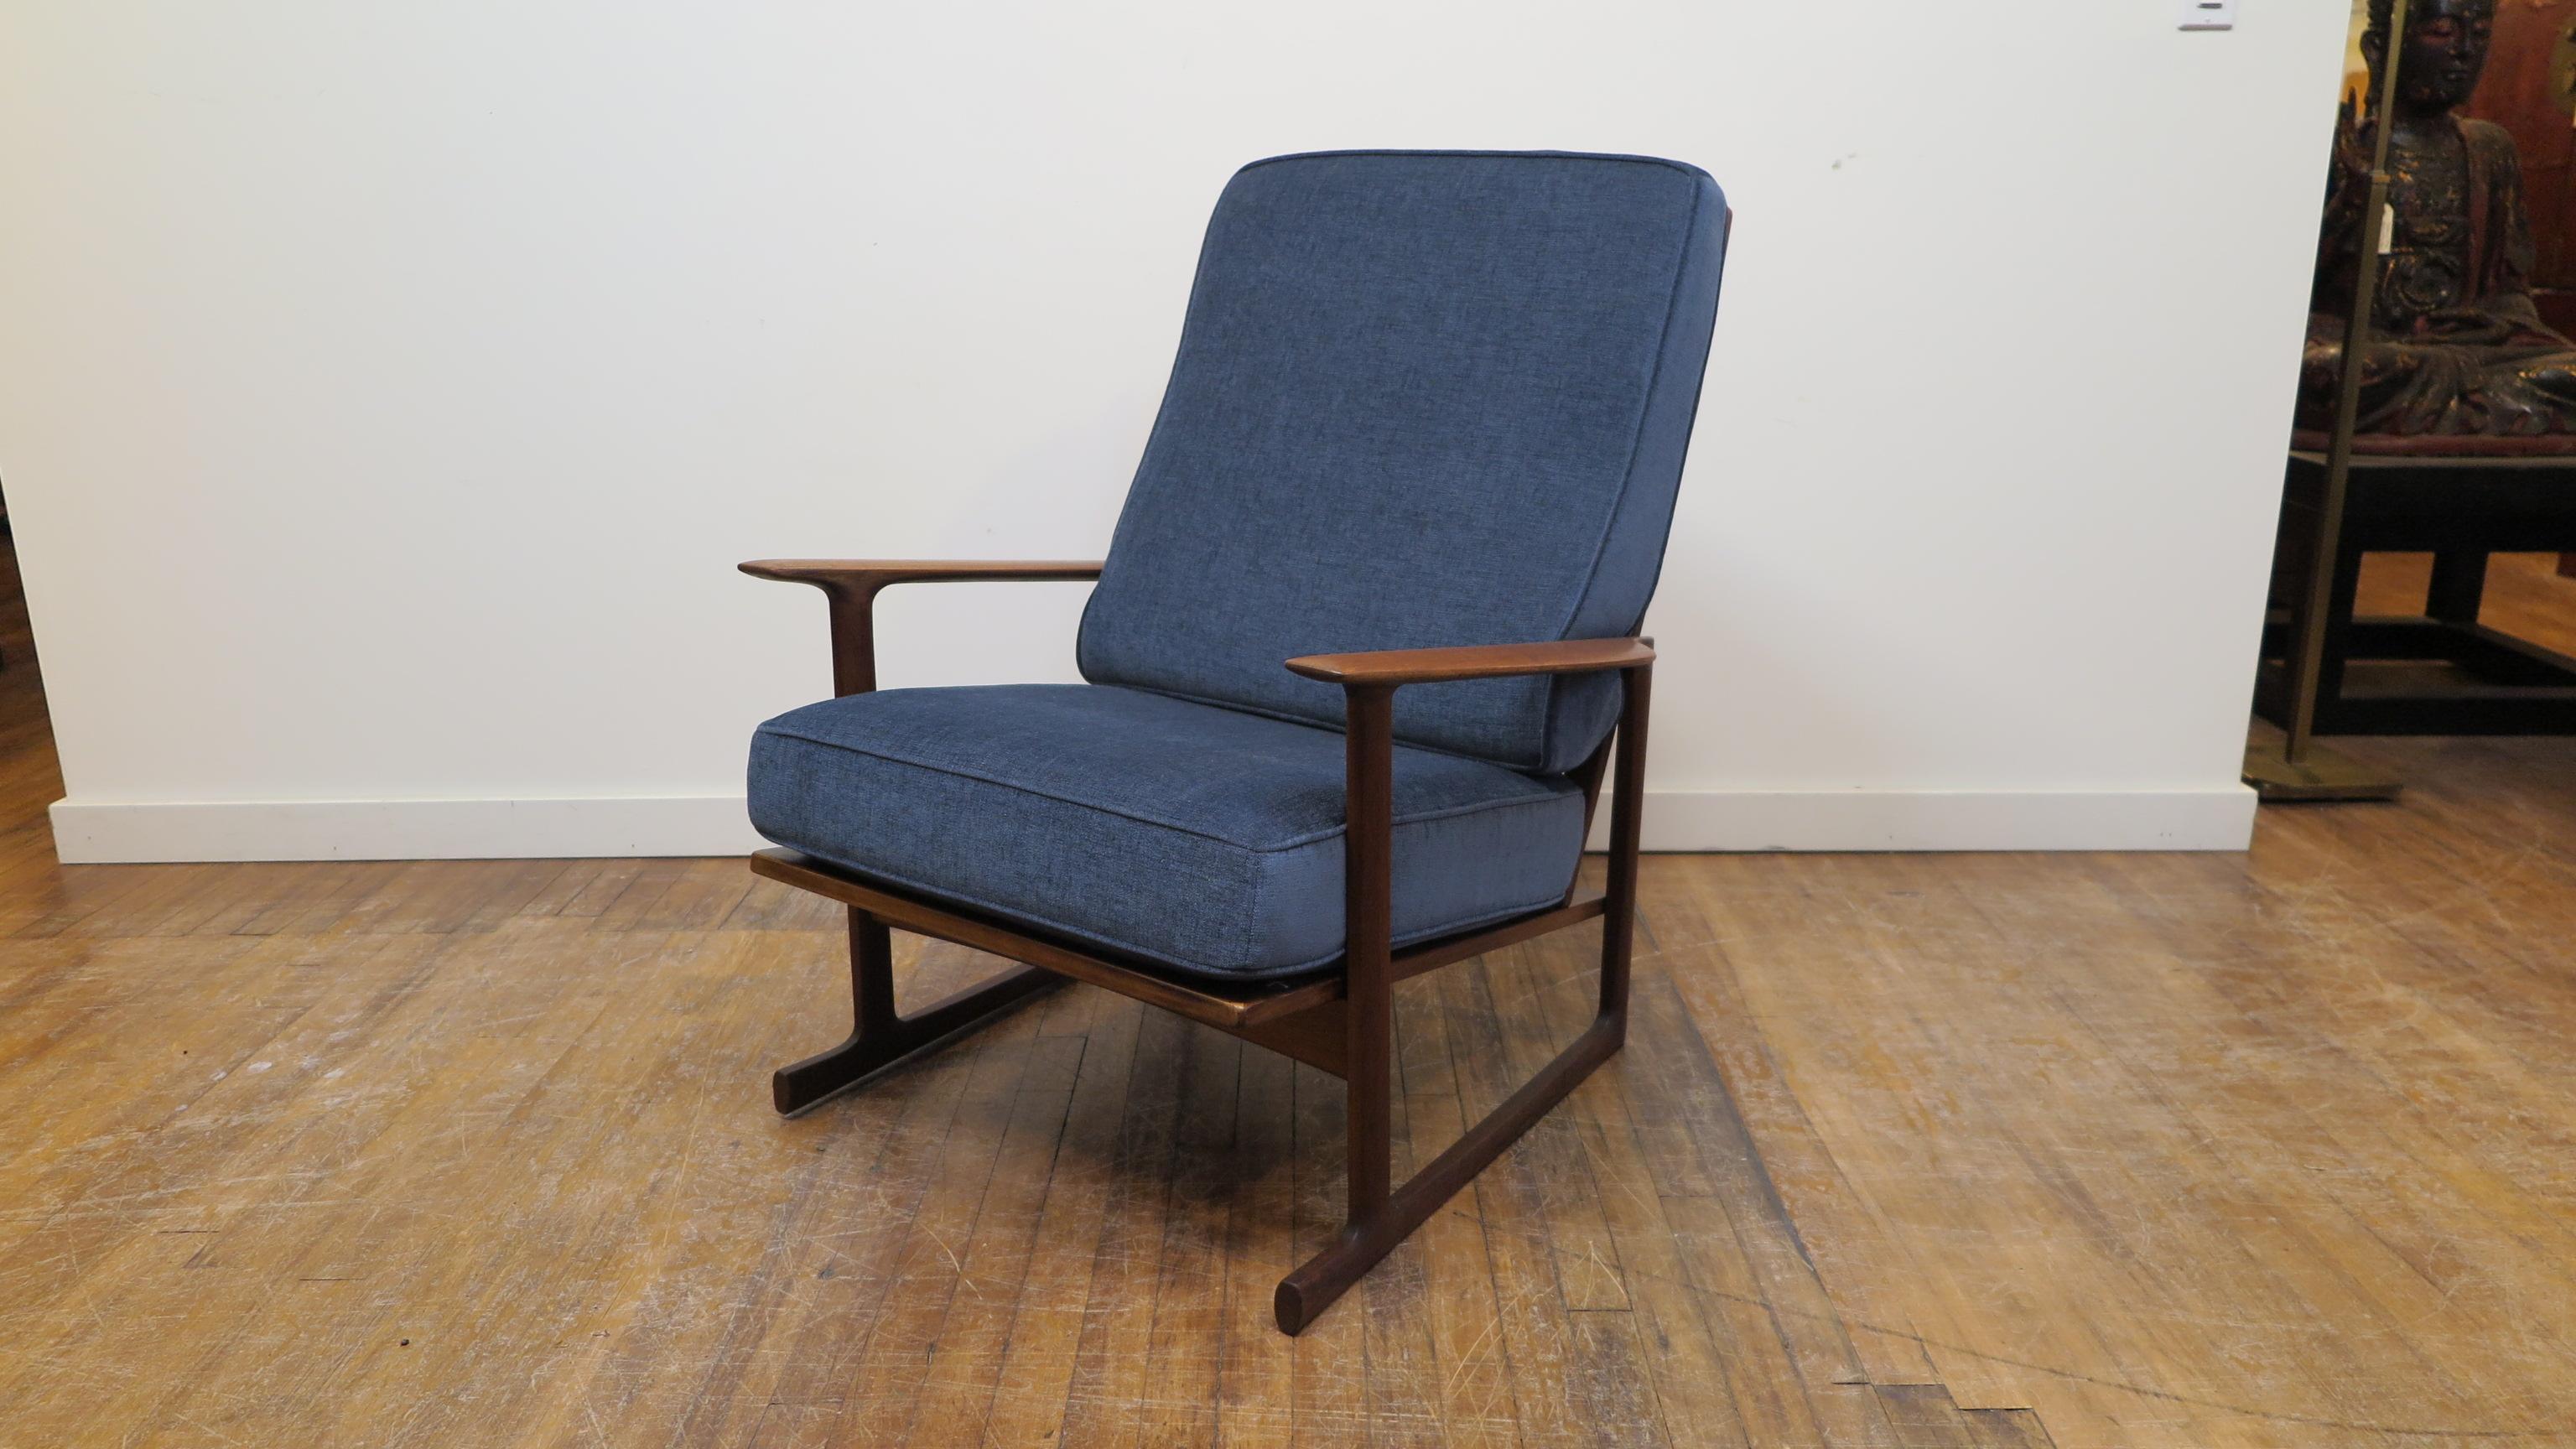 Ib Kofod-Larsen Danish modern high back lounge chair for Selig. Very comfortable lounge chair designed by Ib Kofod-Larsen with a taller back that is angled forward incorporating an architectural geometric back panel design. Danish import badge for